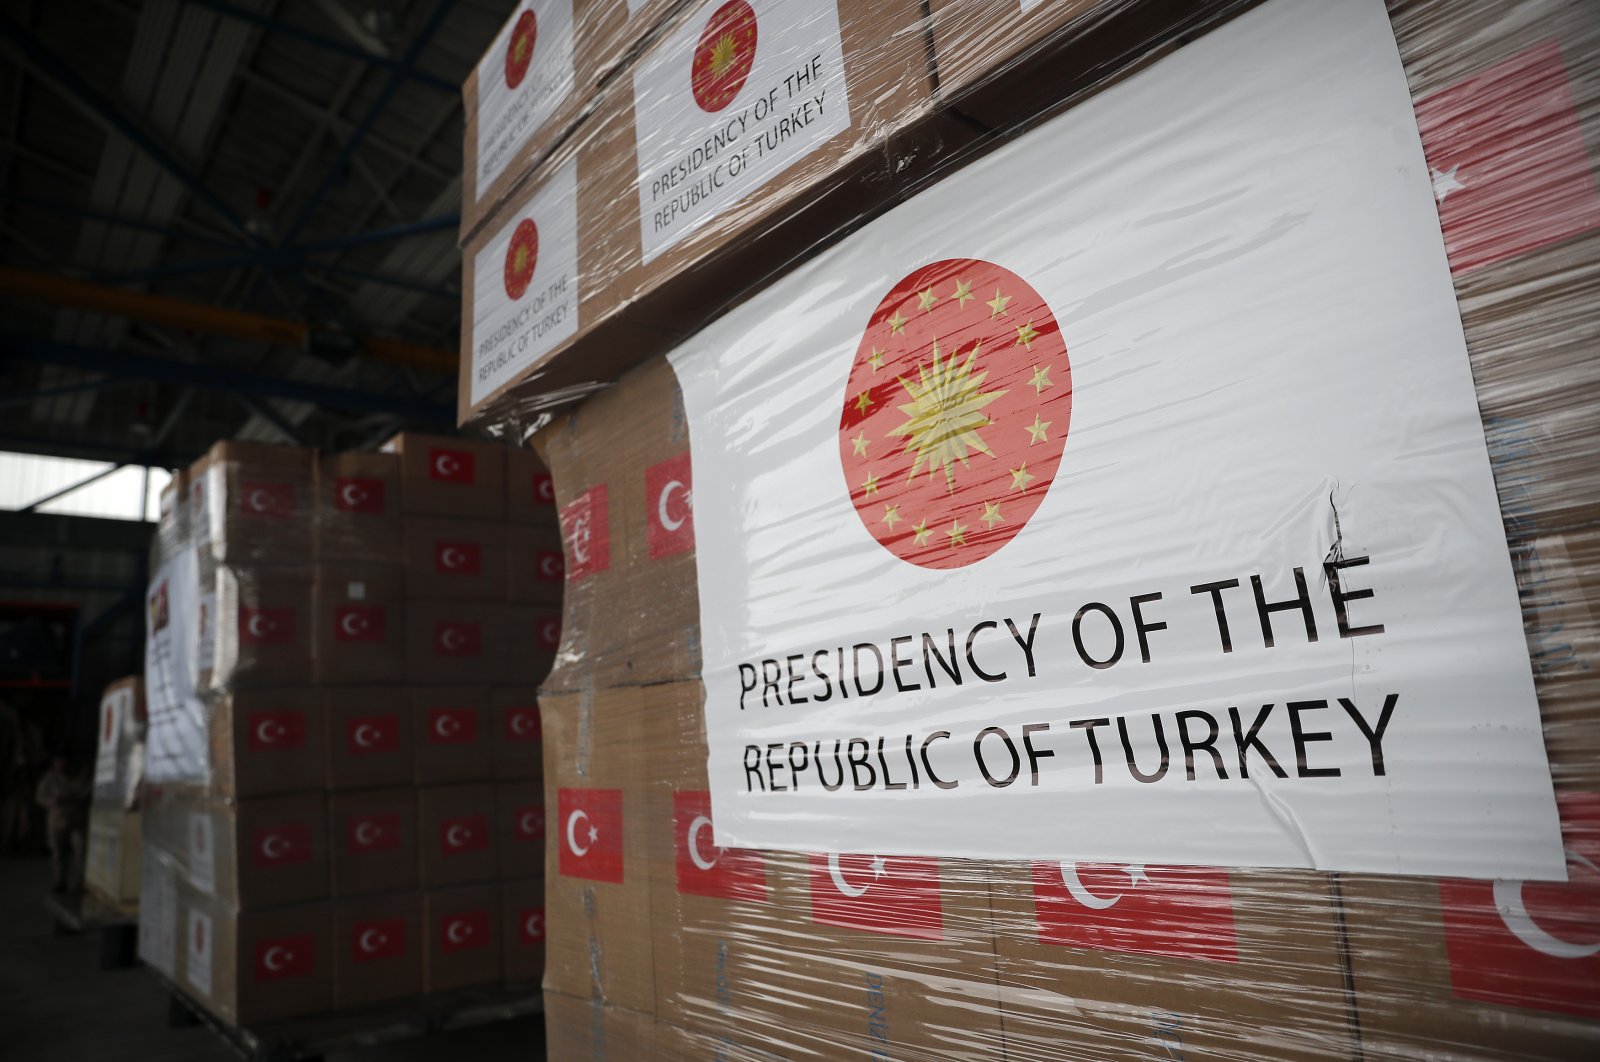 Turkey's medical aid supplies for the fight against the coronavirus pandemic reach Madrid, Spain, on Wednesday, April 1, 2020. (AA Photo)